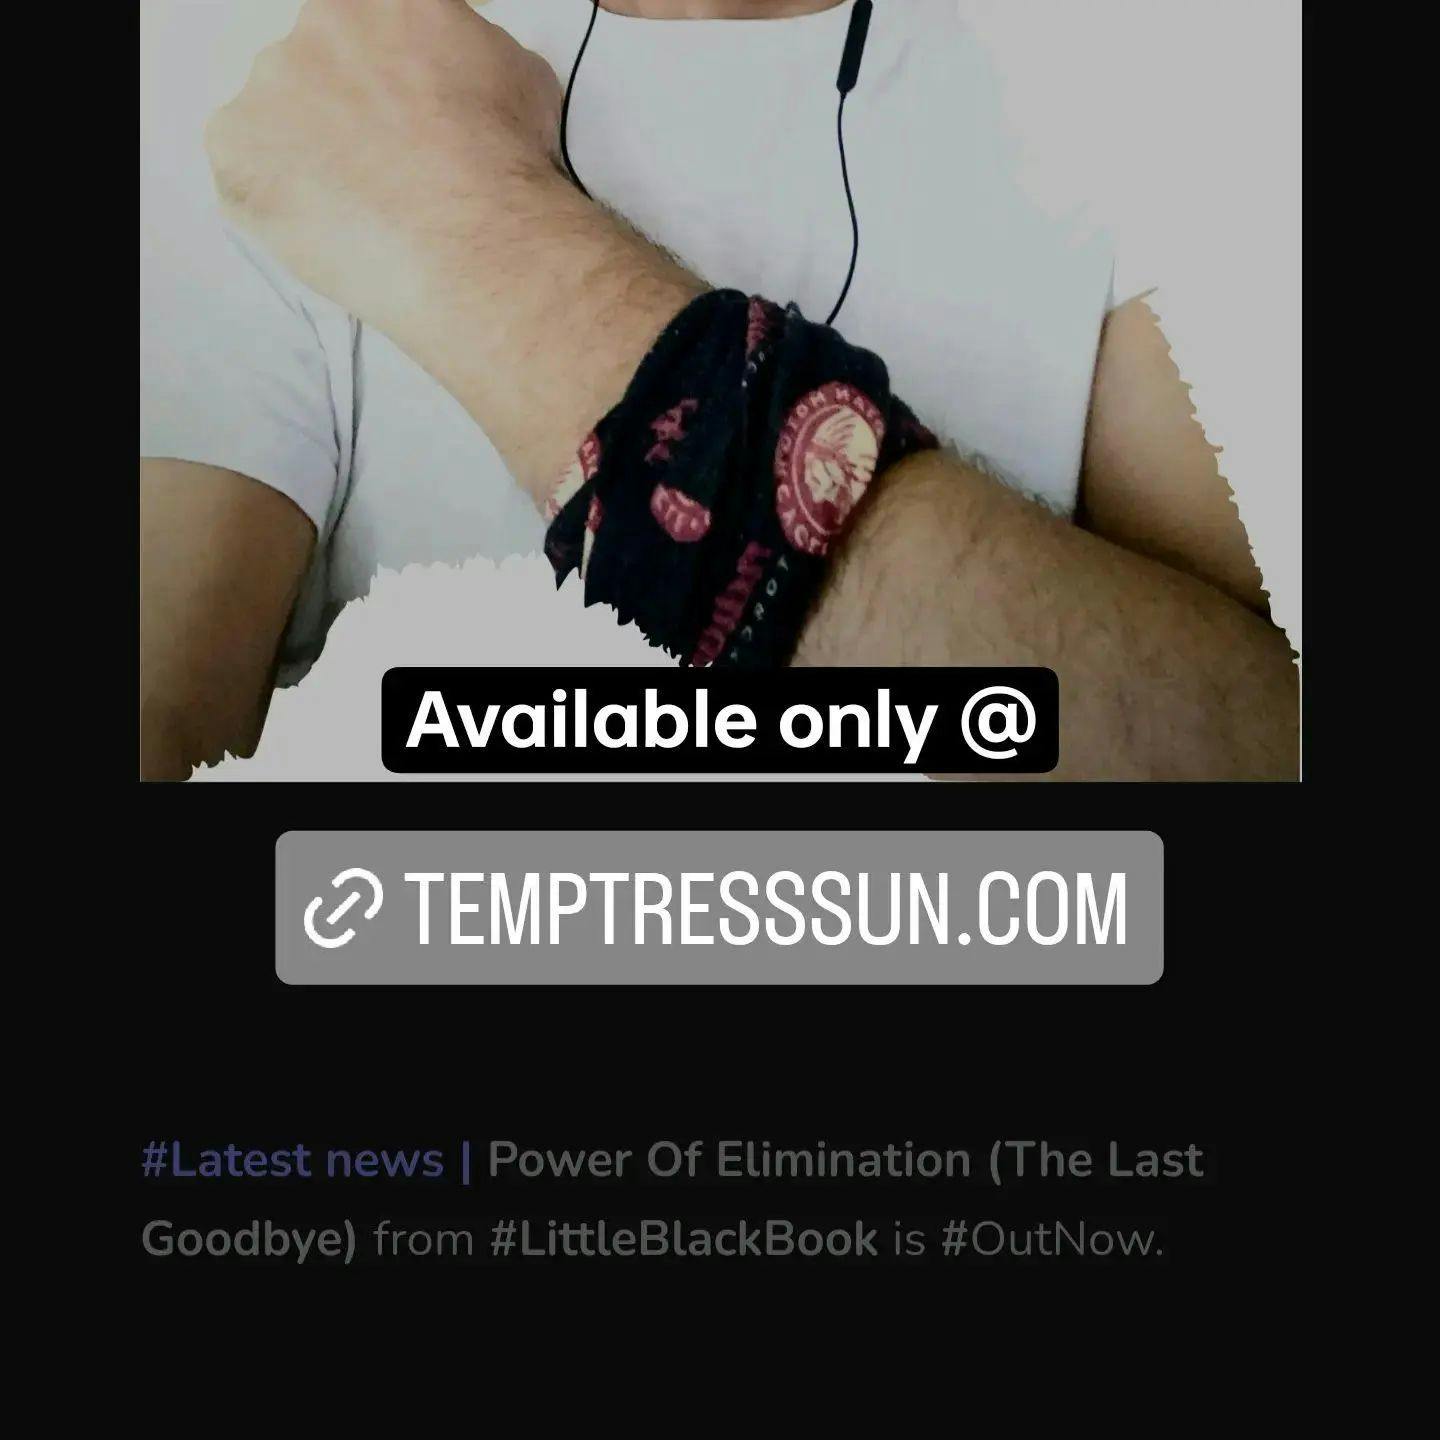 Power Of Elimination (The Last Goodbye) from #LittleBlackBook is 
#OutNow. Available only at temptresssun.com 
@temptress_sun

​#roots #beautiful #scenery #debate #endless_talks #uprising #lullaby #temptress #sun #temptresssun  #music #album #outnow #nowplaying #photography #youtube #Spotify #SoundCloud #bandcamp #AppleMusic #deezer #reverbnation #anghami #Twitter #thoughts #poetry #cairo #Egypt